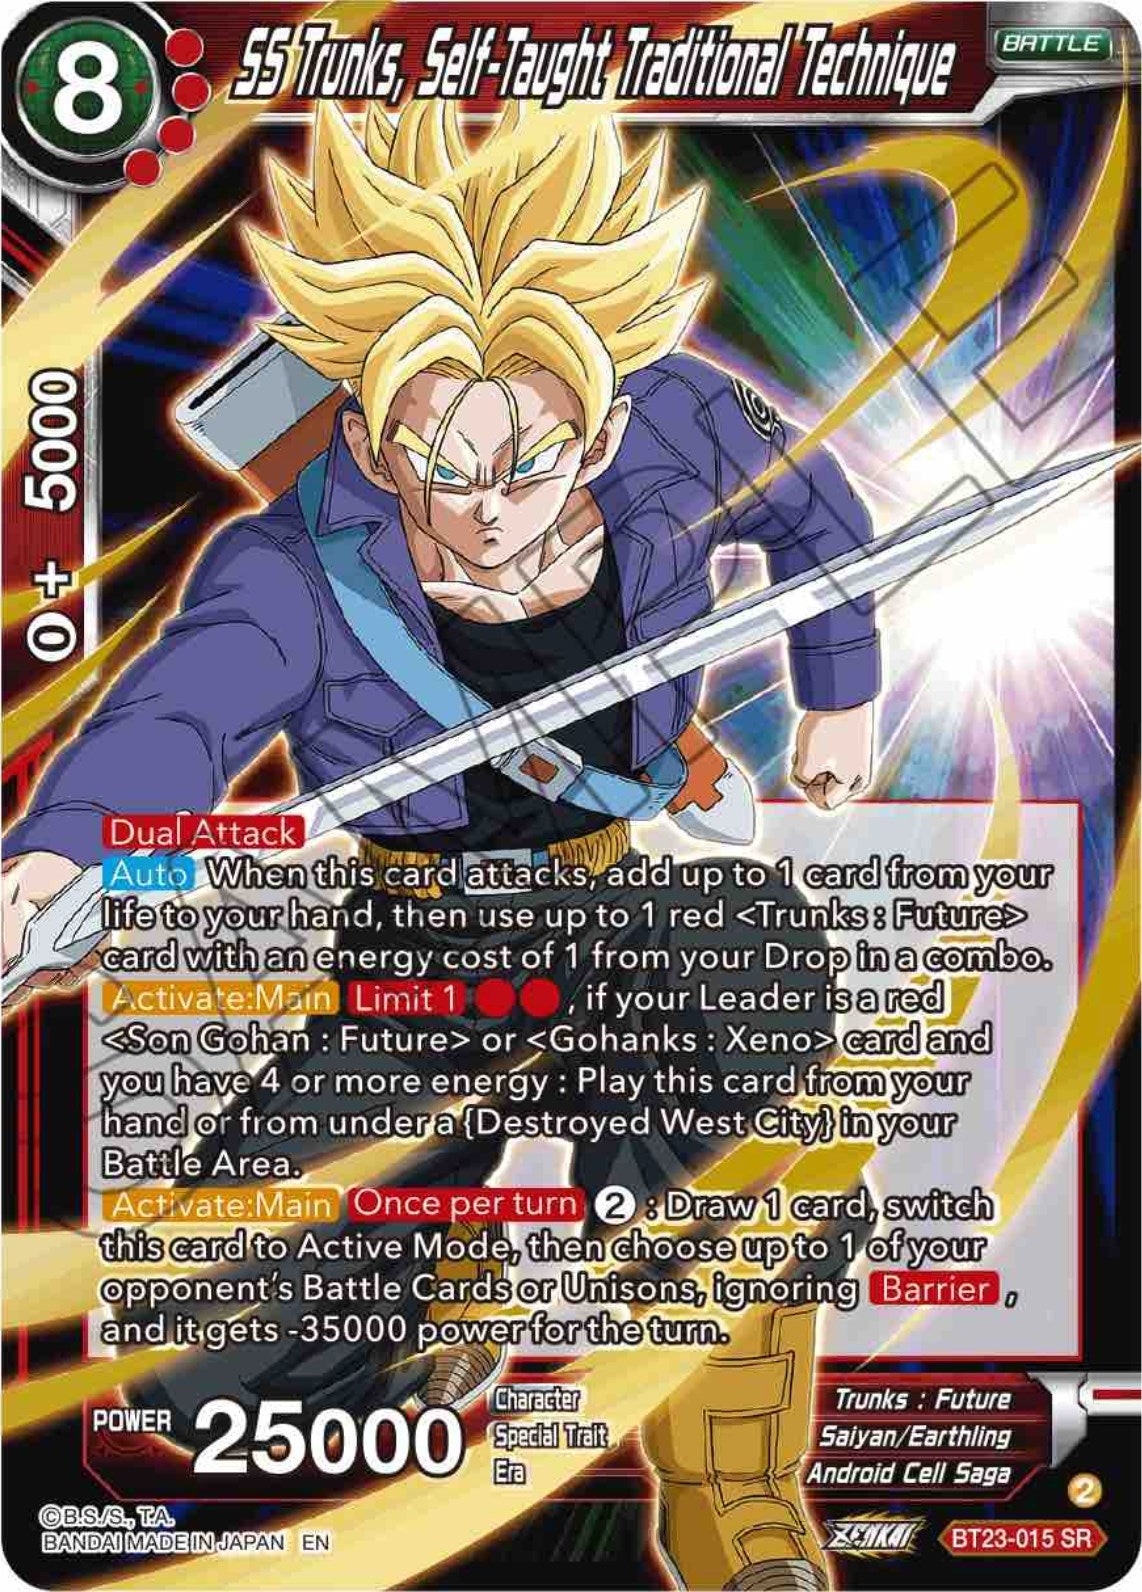 SS Trunks, Self-Taught Traditional Technique (BT23-015) [Perfect Combination] | Devastation Store